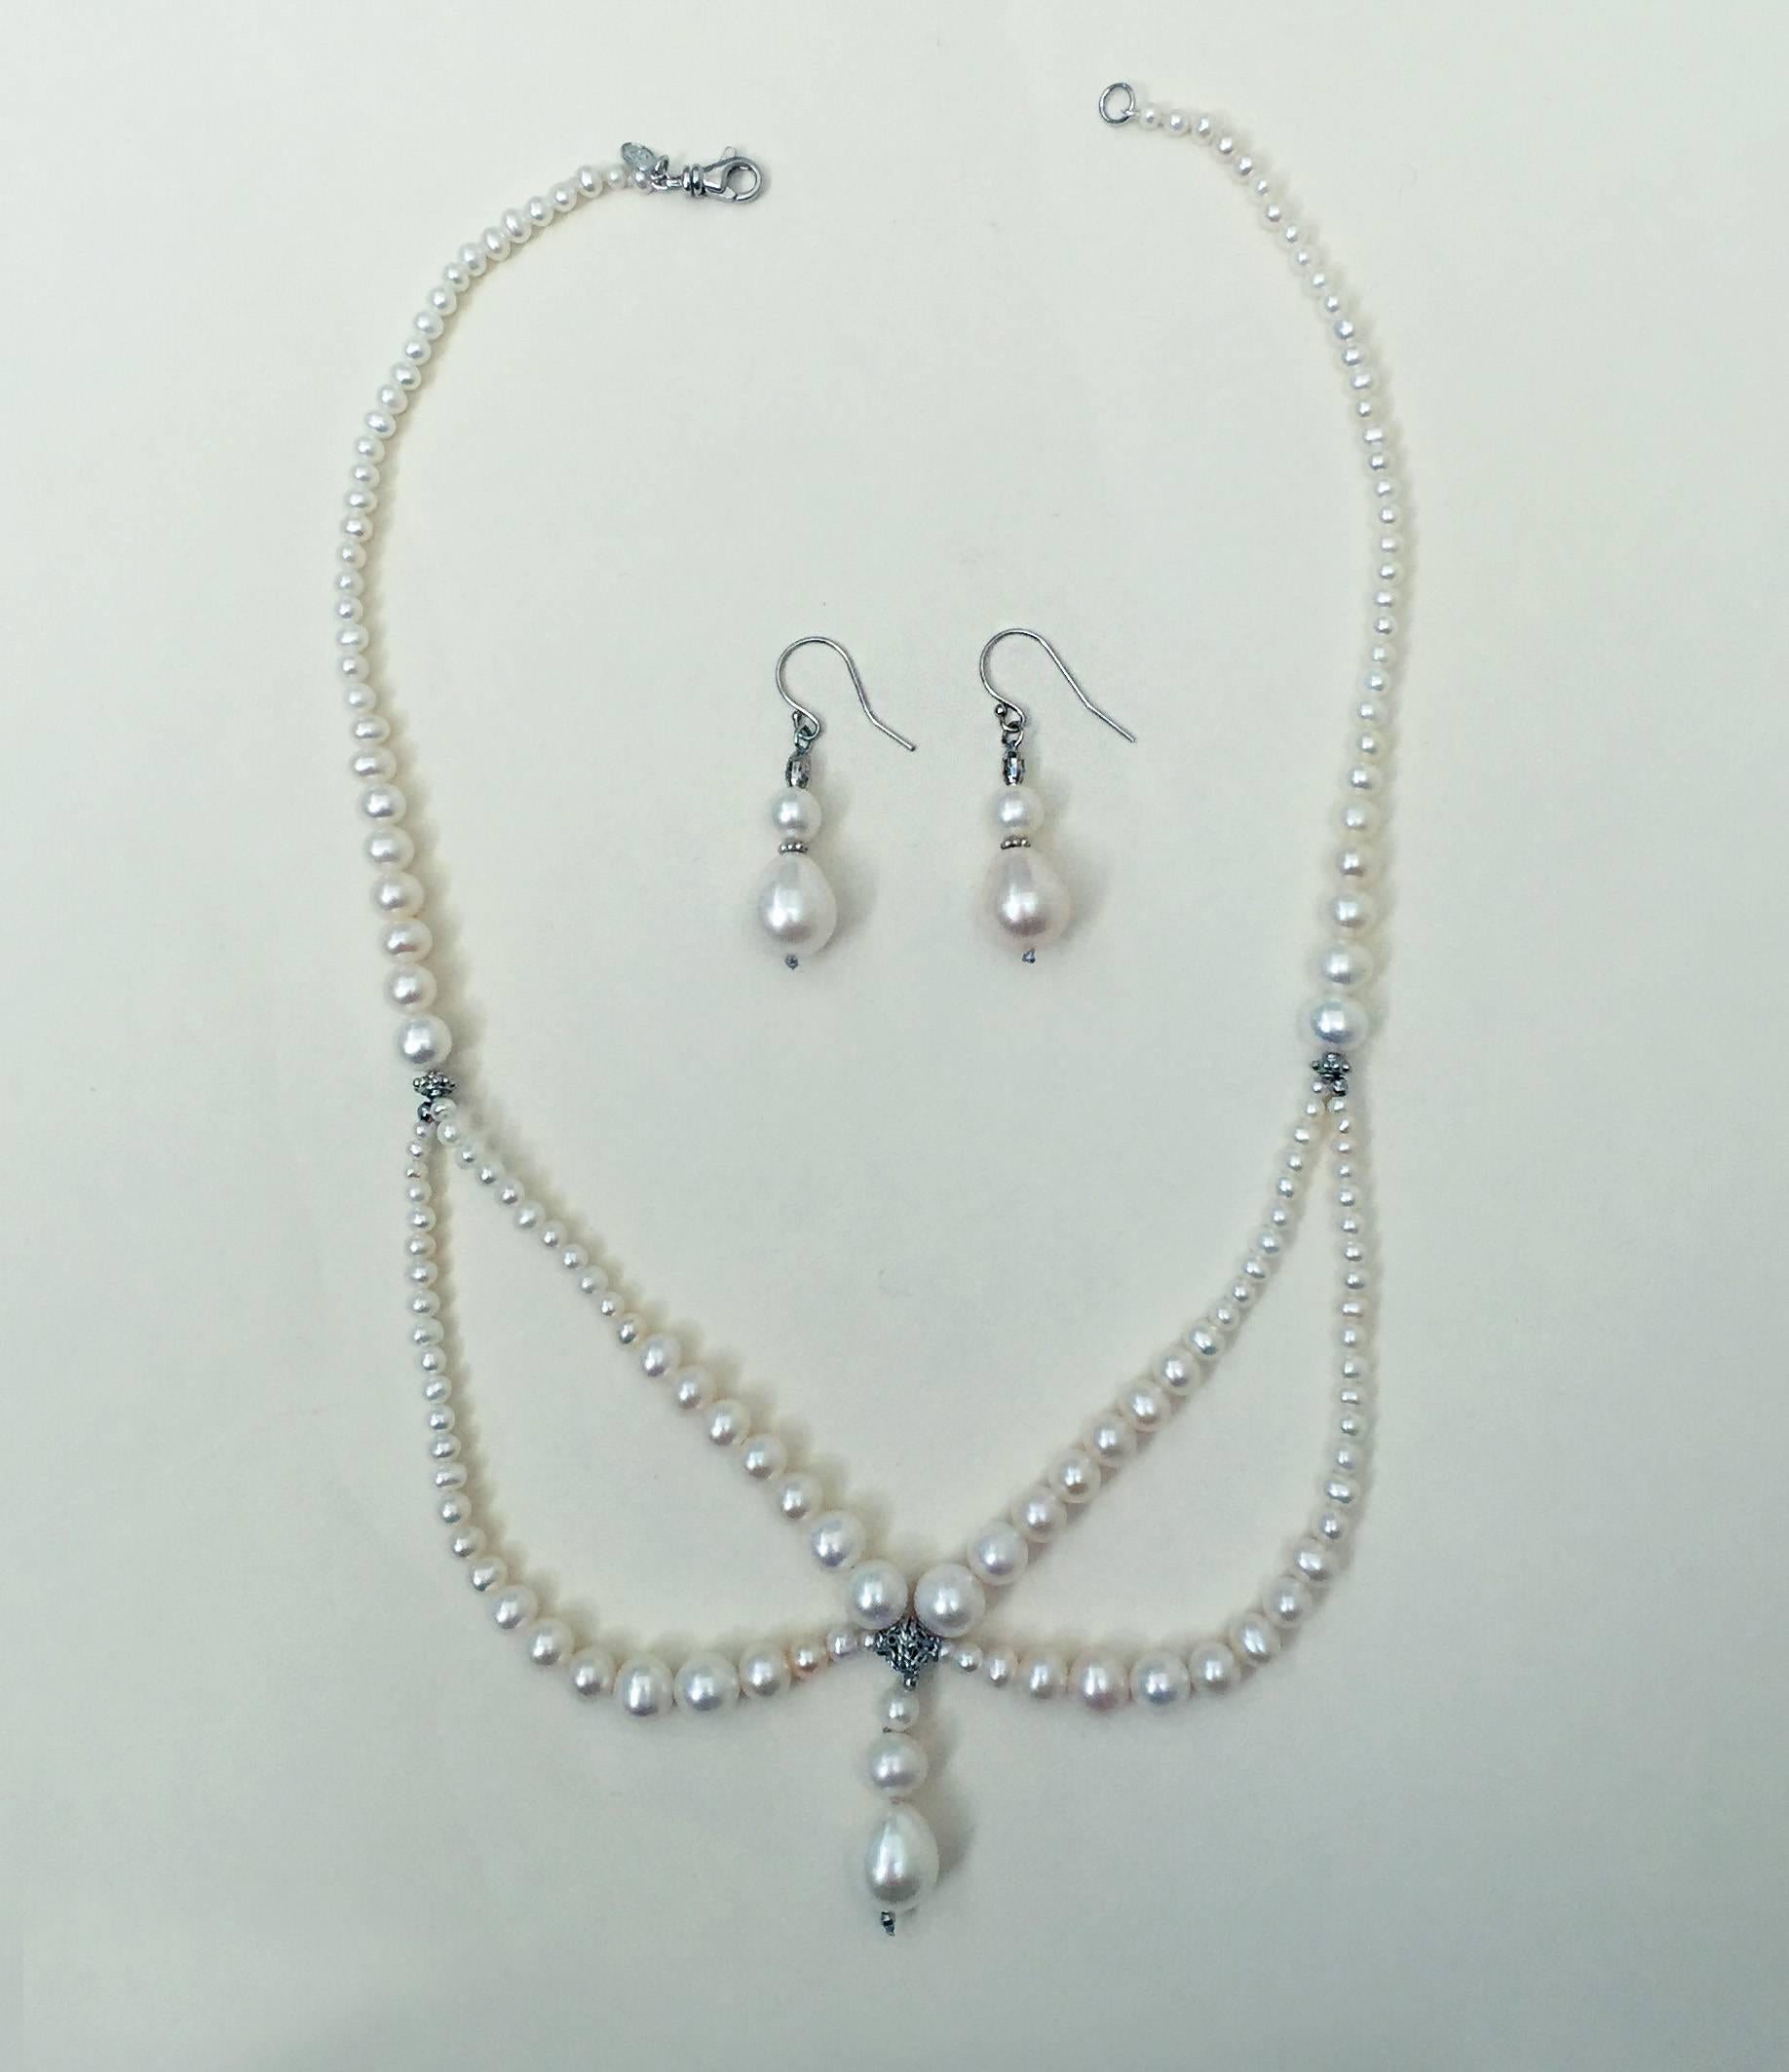 Double Pearl Earrings with Platinum Plated Silver Beads by Marina J. 2